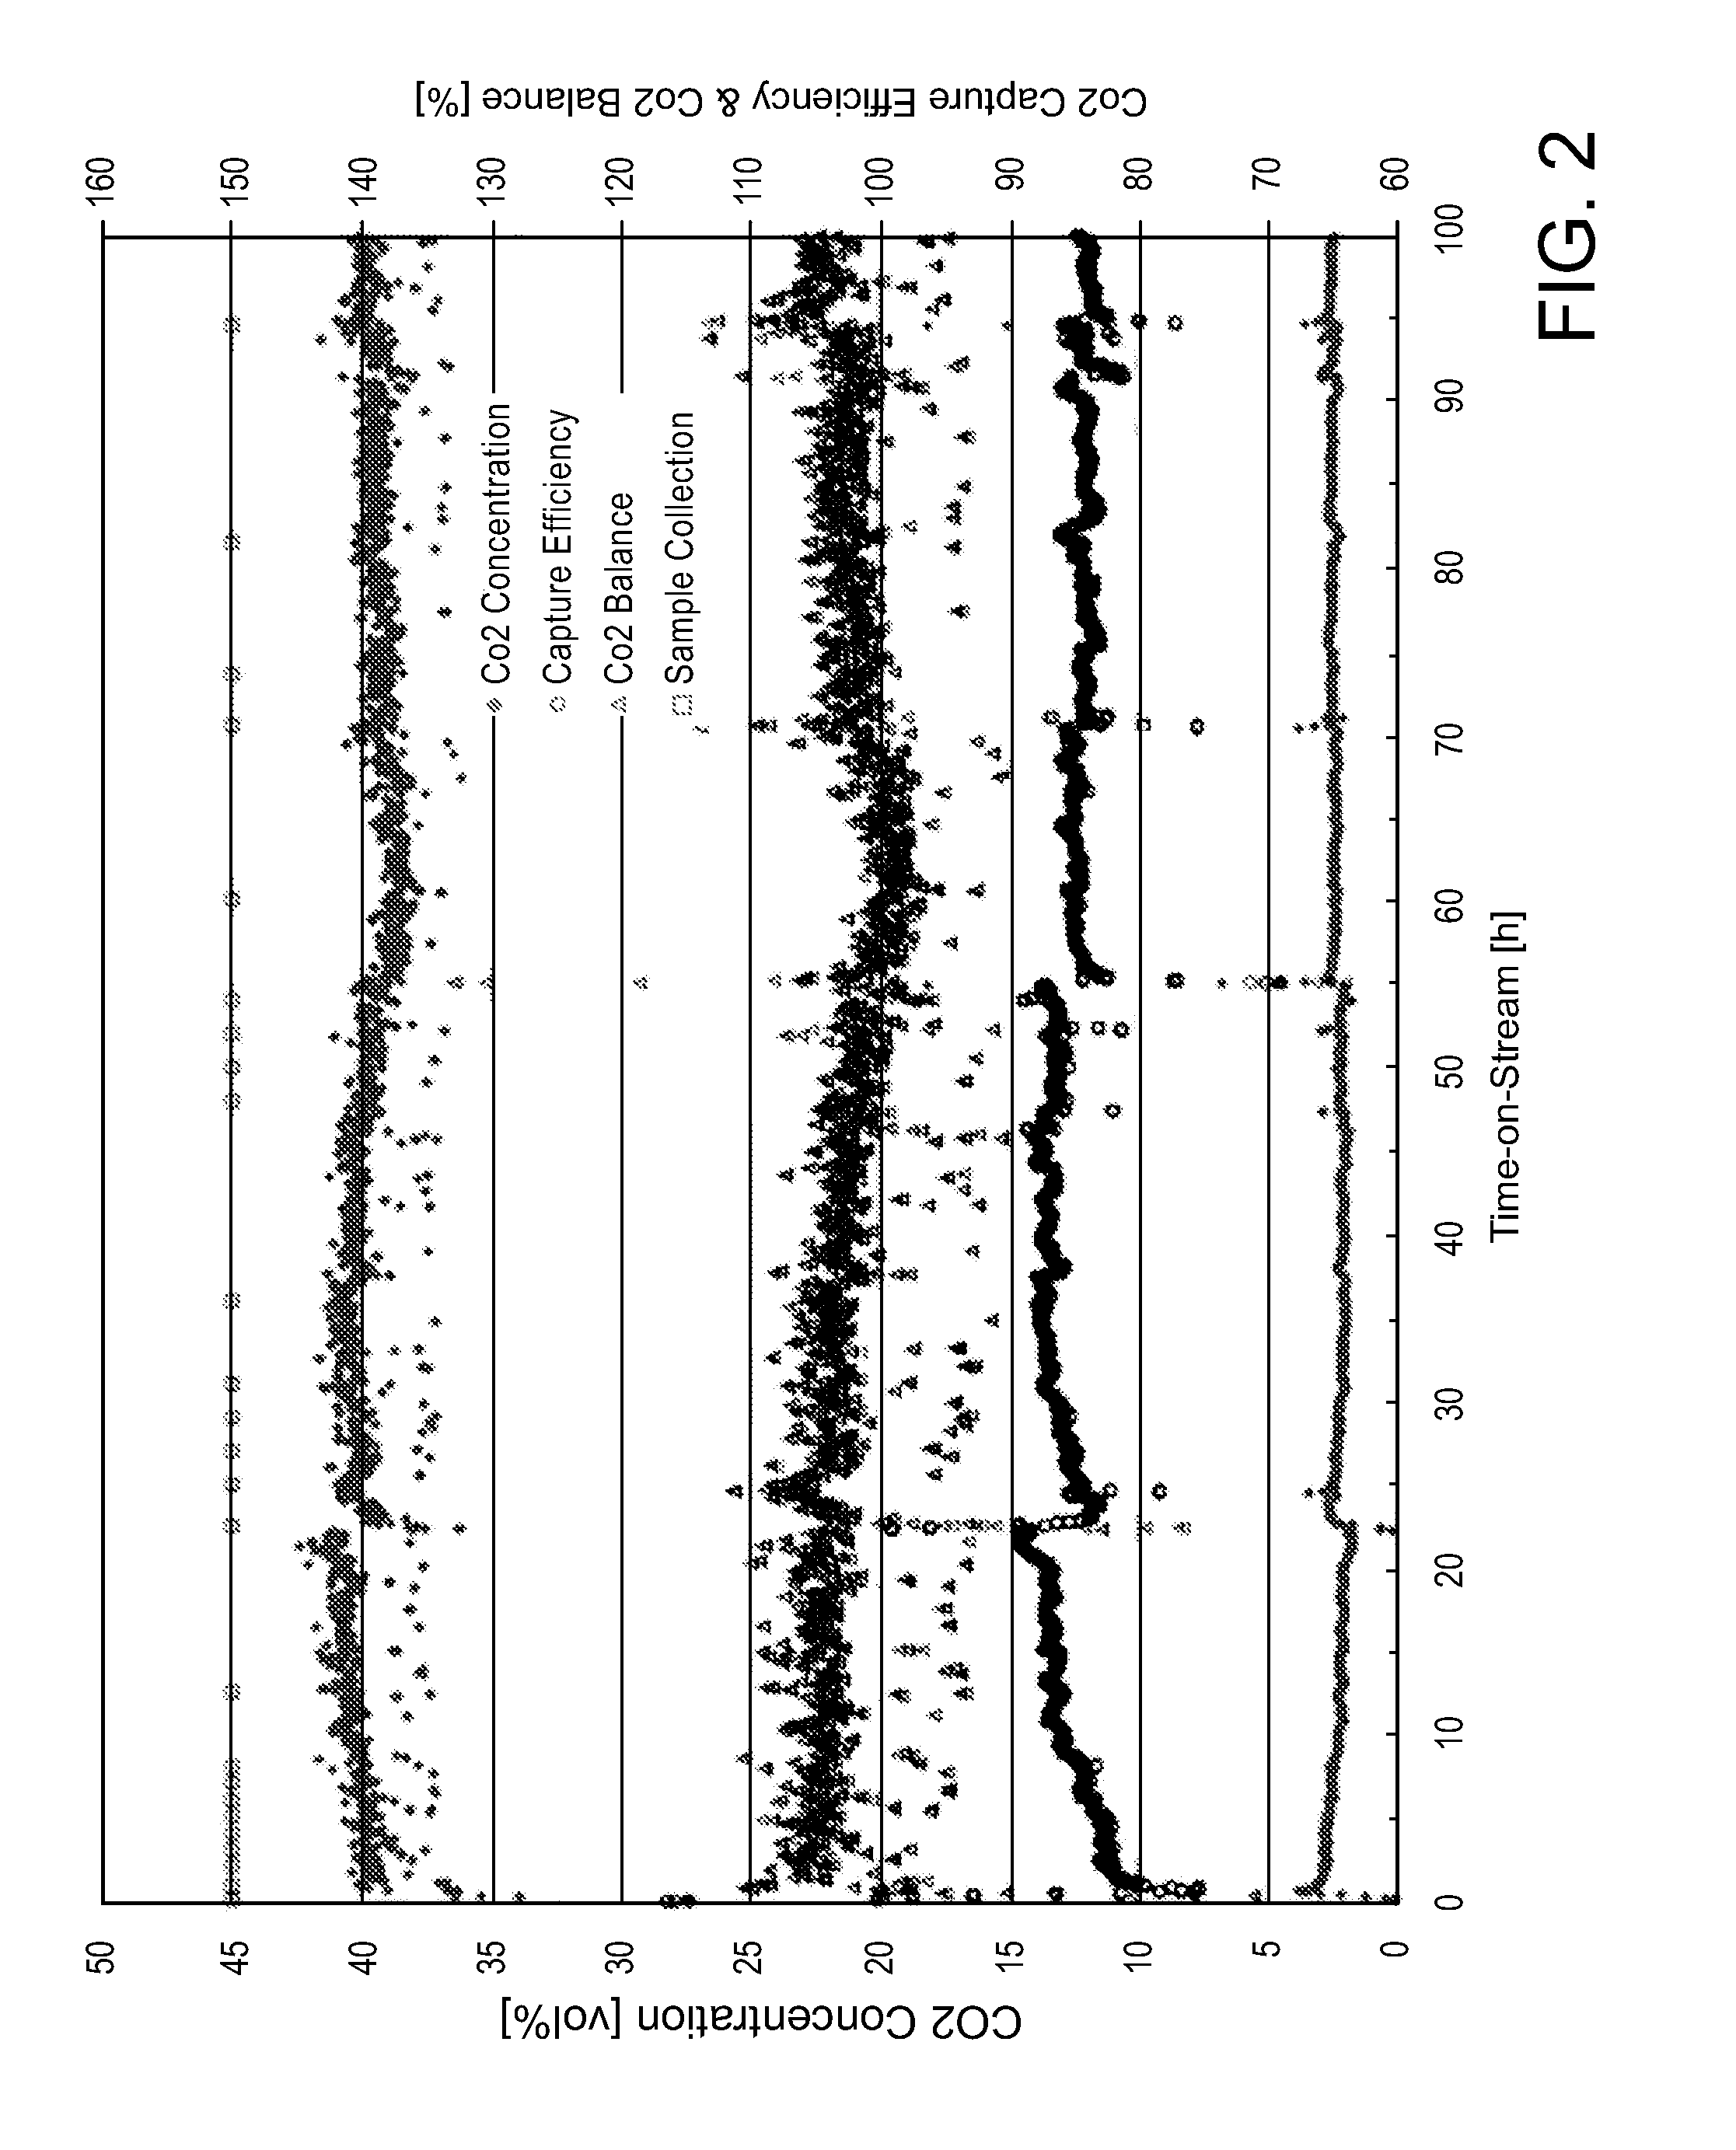 Water control in non-aqueous acid gas recovery systems